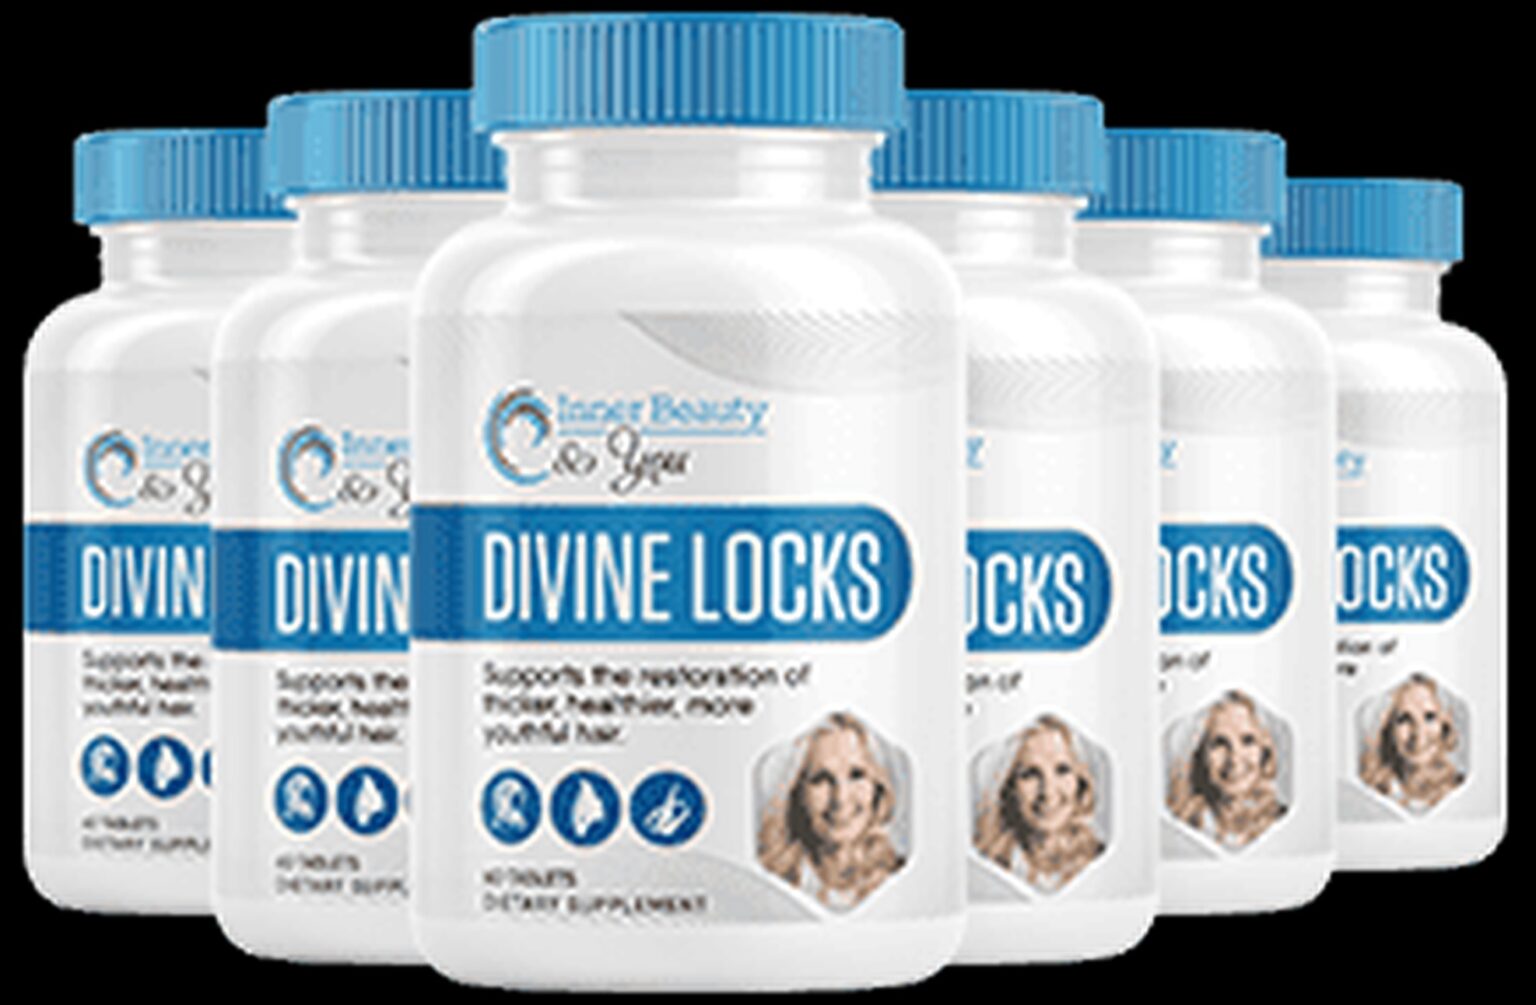 Given how popular DivineLocks is, a lot of customers want to know whether they can buy DivineLocks on Amazon or Walmart or GNC or eBay.